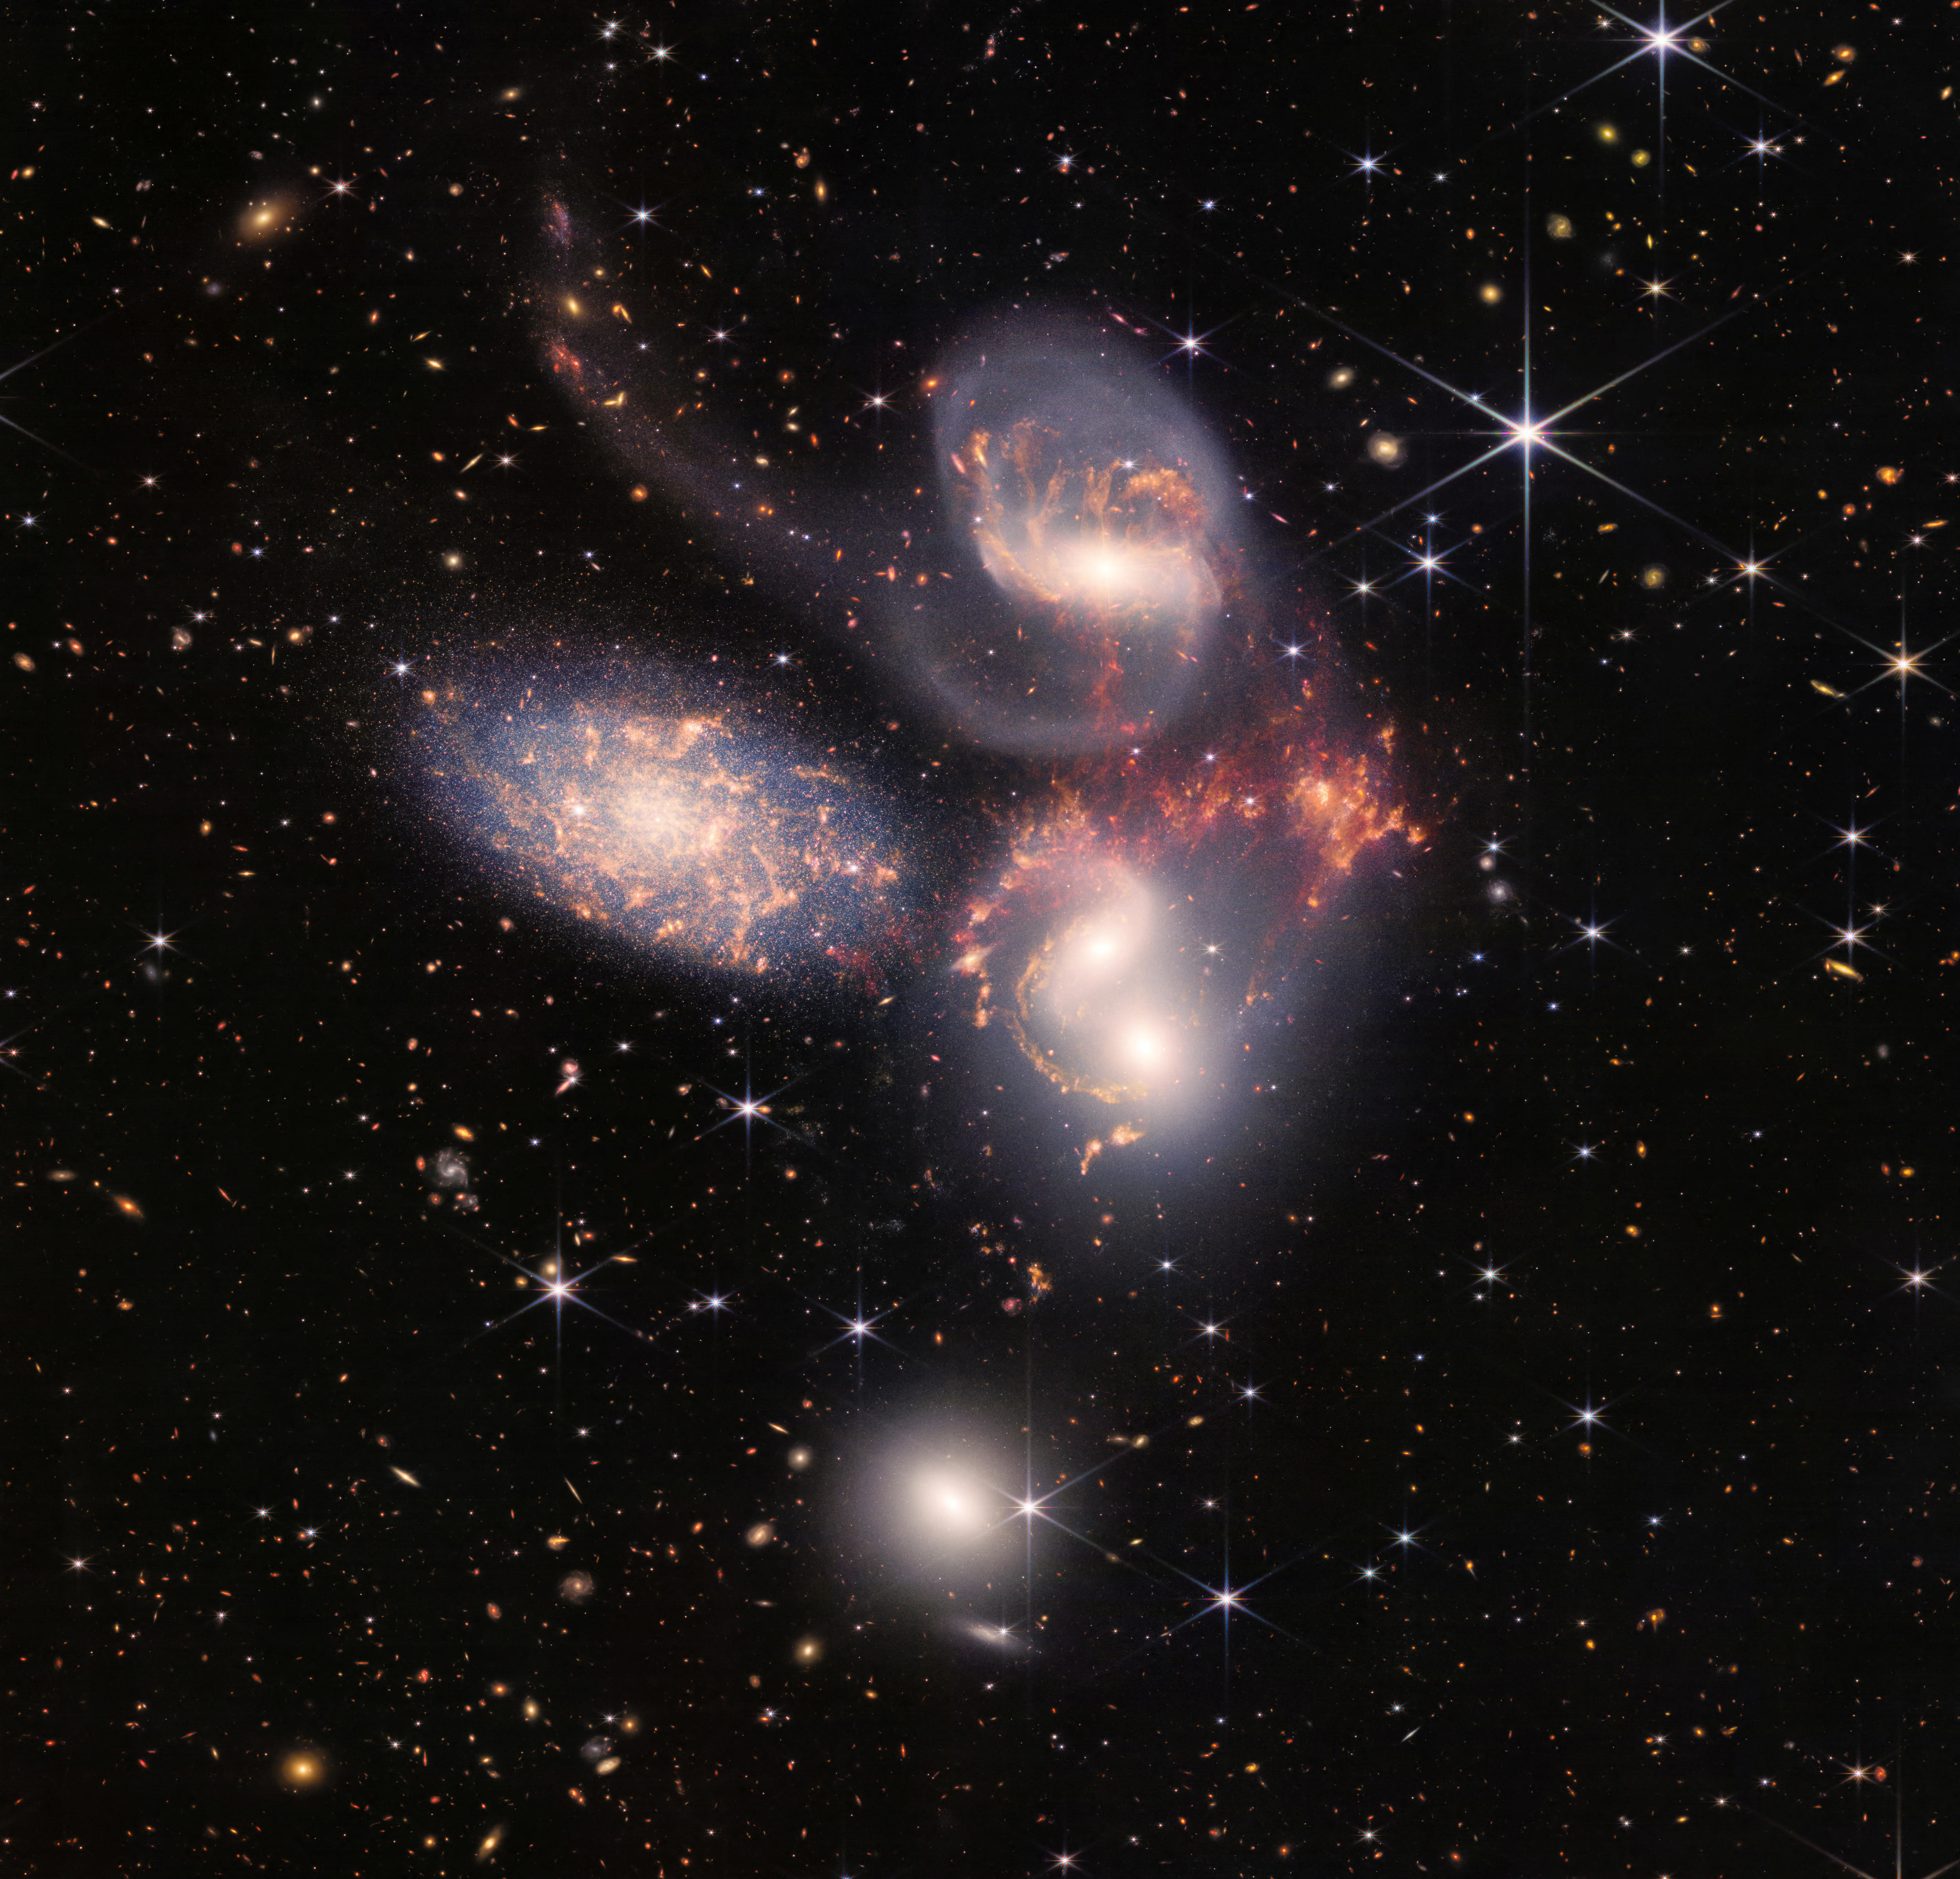 A group of five galaxies that appear close to each other in the sky